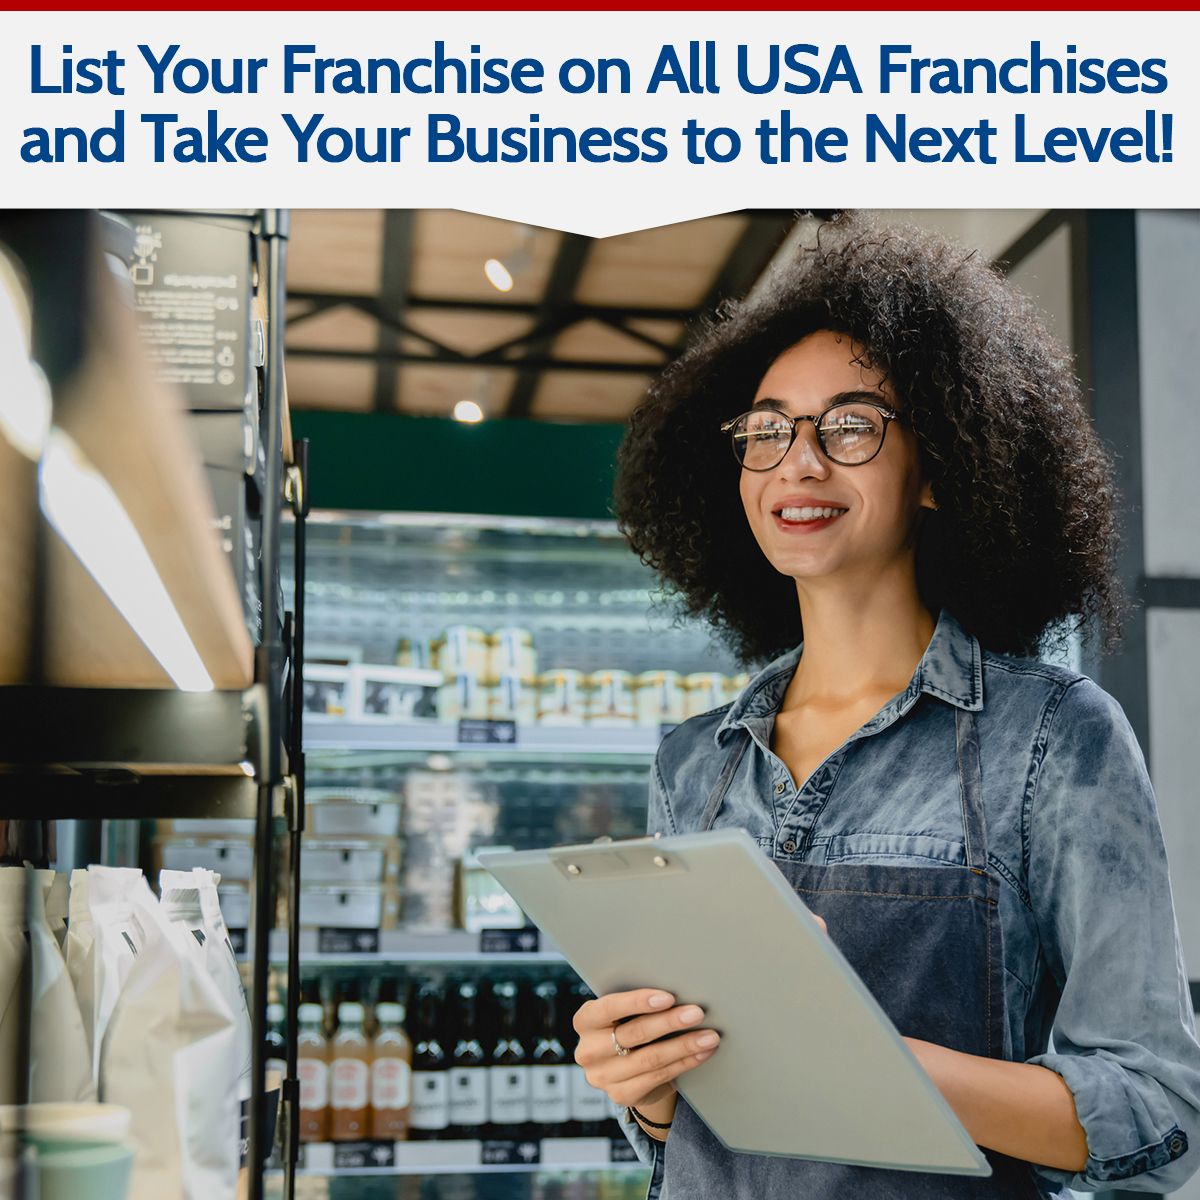 List Your Franchise on All USA Franchises and Take Your Business to the Next Level!